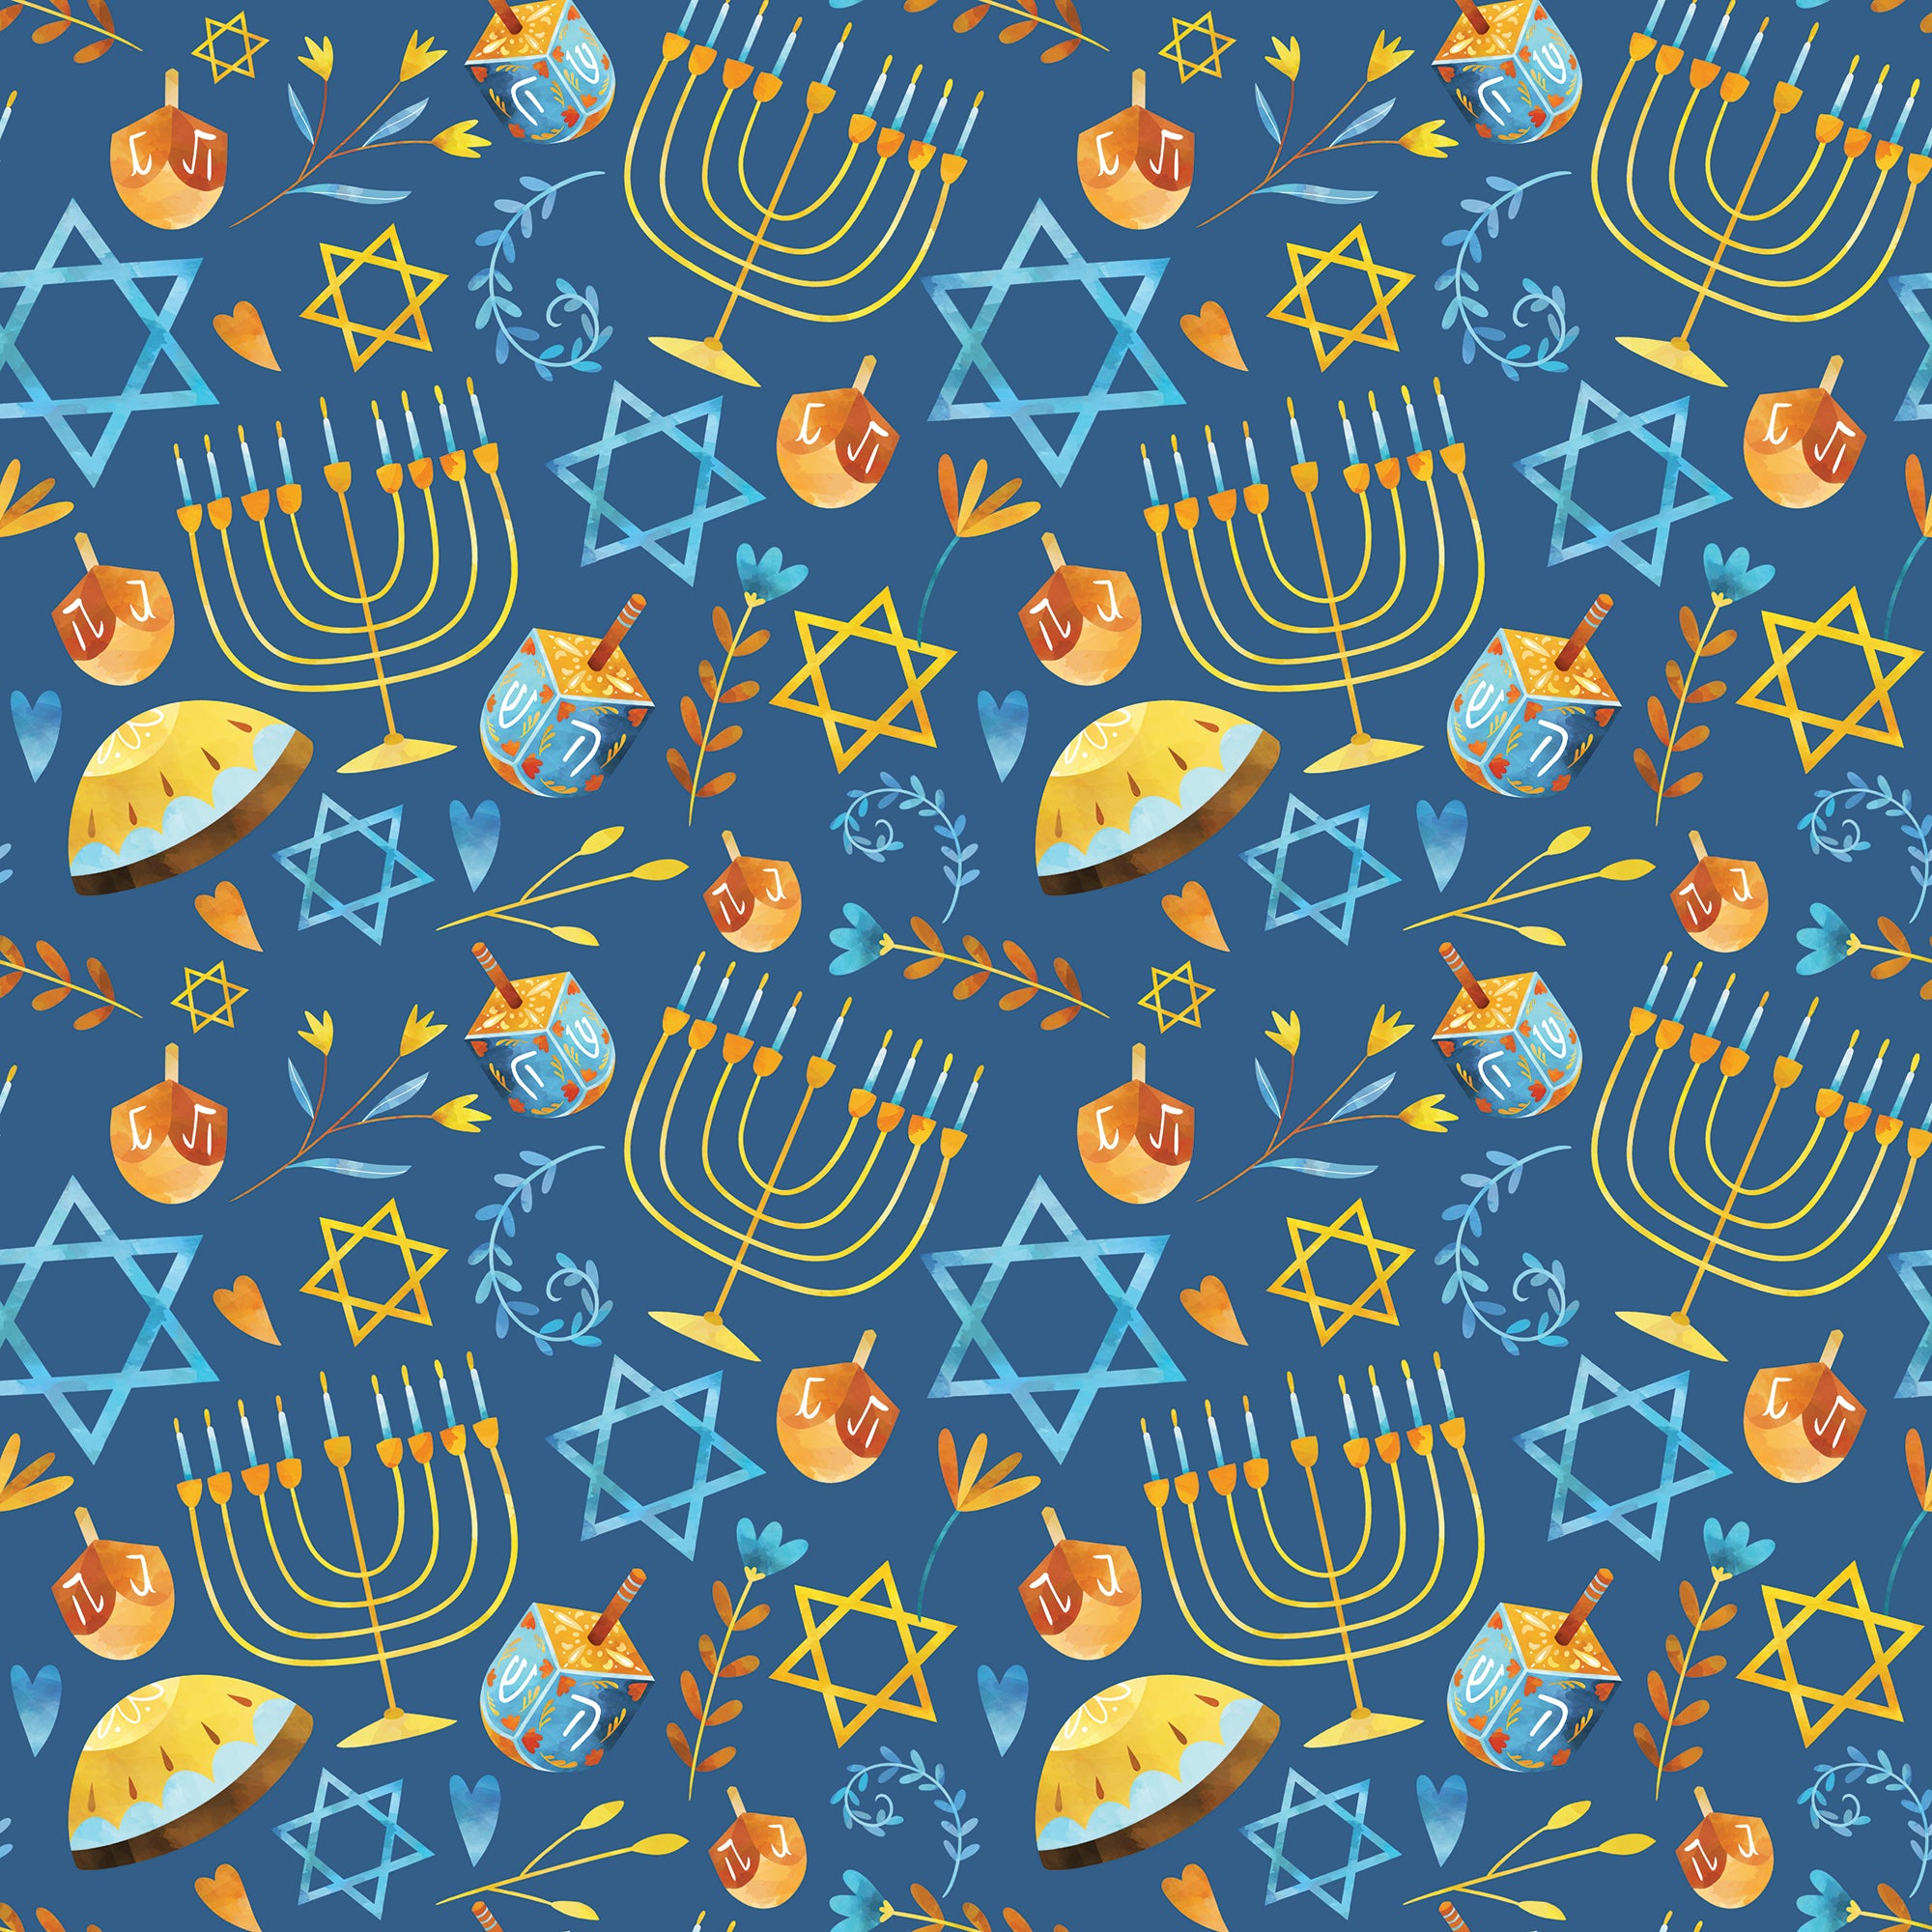 Bolsome 60 Sheets Star of David Tissue Paper Bulk, Hanukkah Wrapping Tissue  Paper Sheets Large Blue Hexagram Gift Wrapping Tissue for Happy Hanukkah